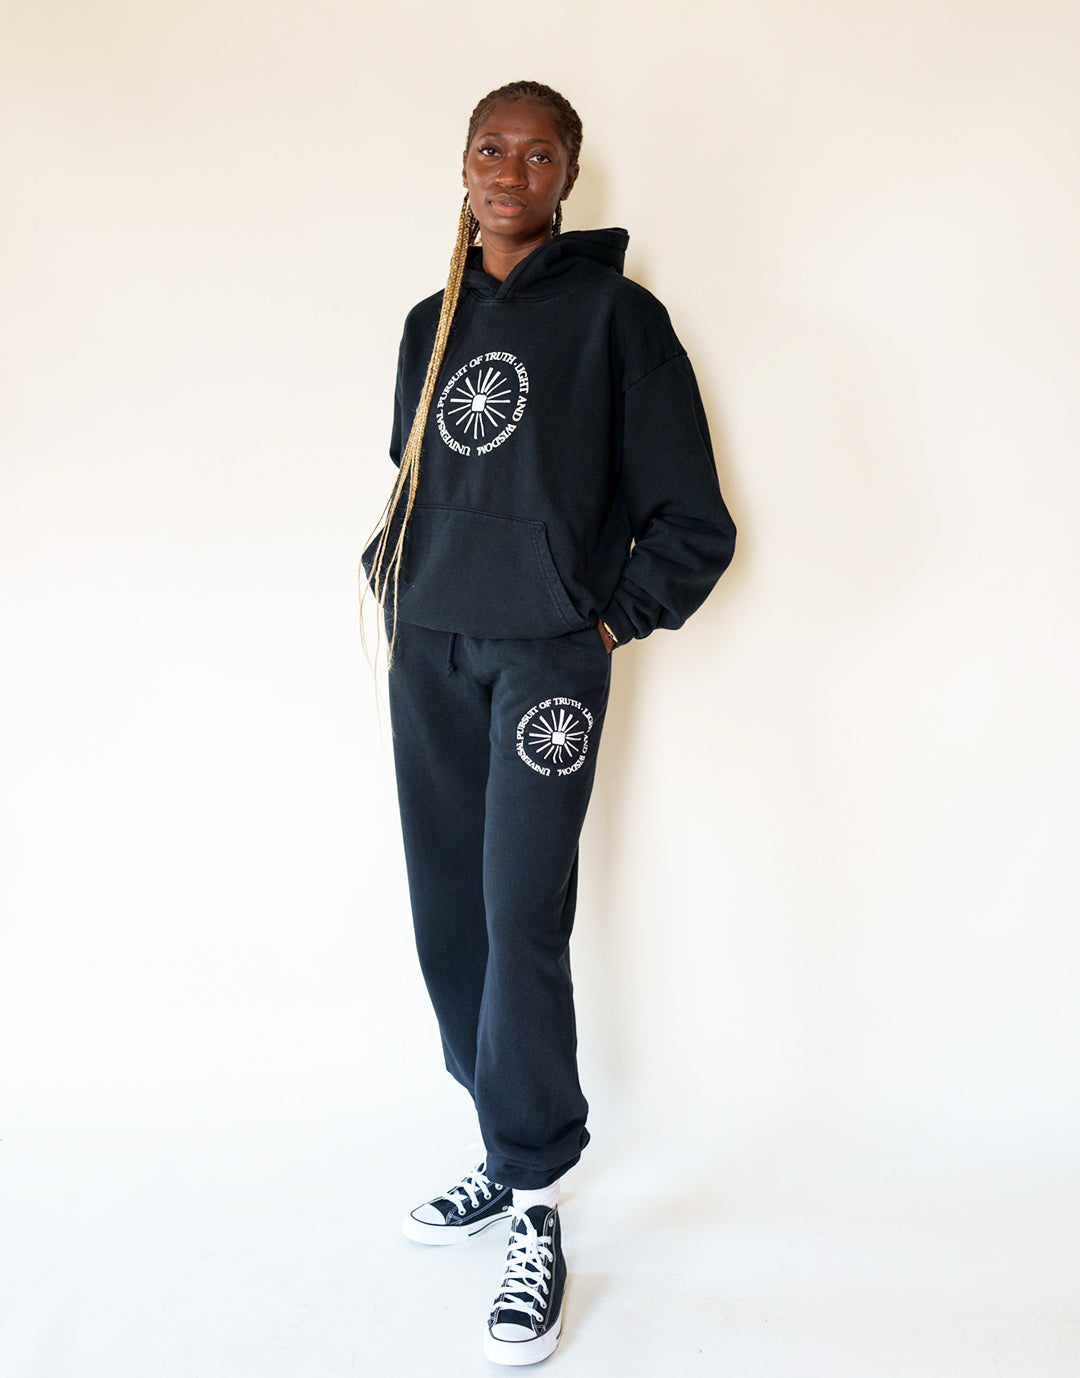 Model wears Universal Pursuit Sweatpants in size Small. 100% French Cotton Terry Sweatpants in Black Beauty 